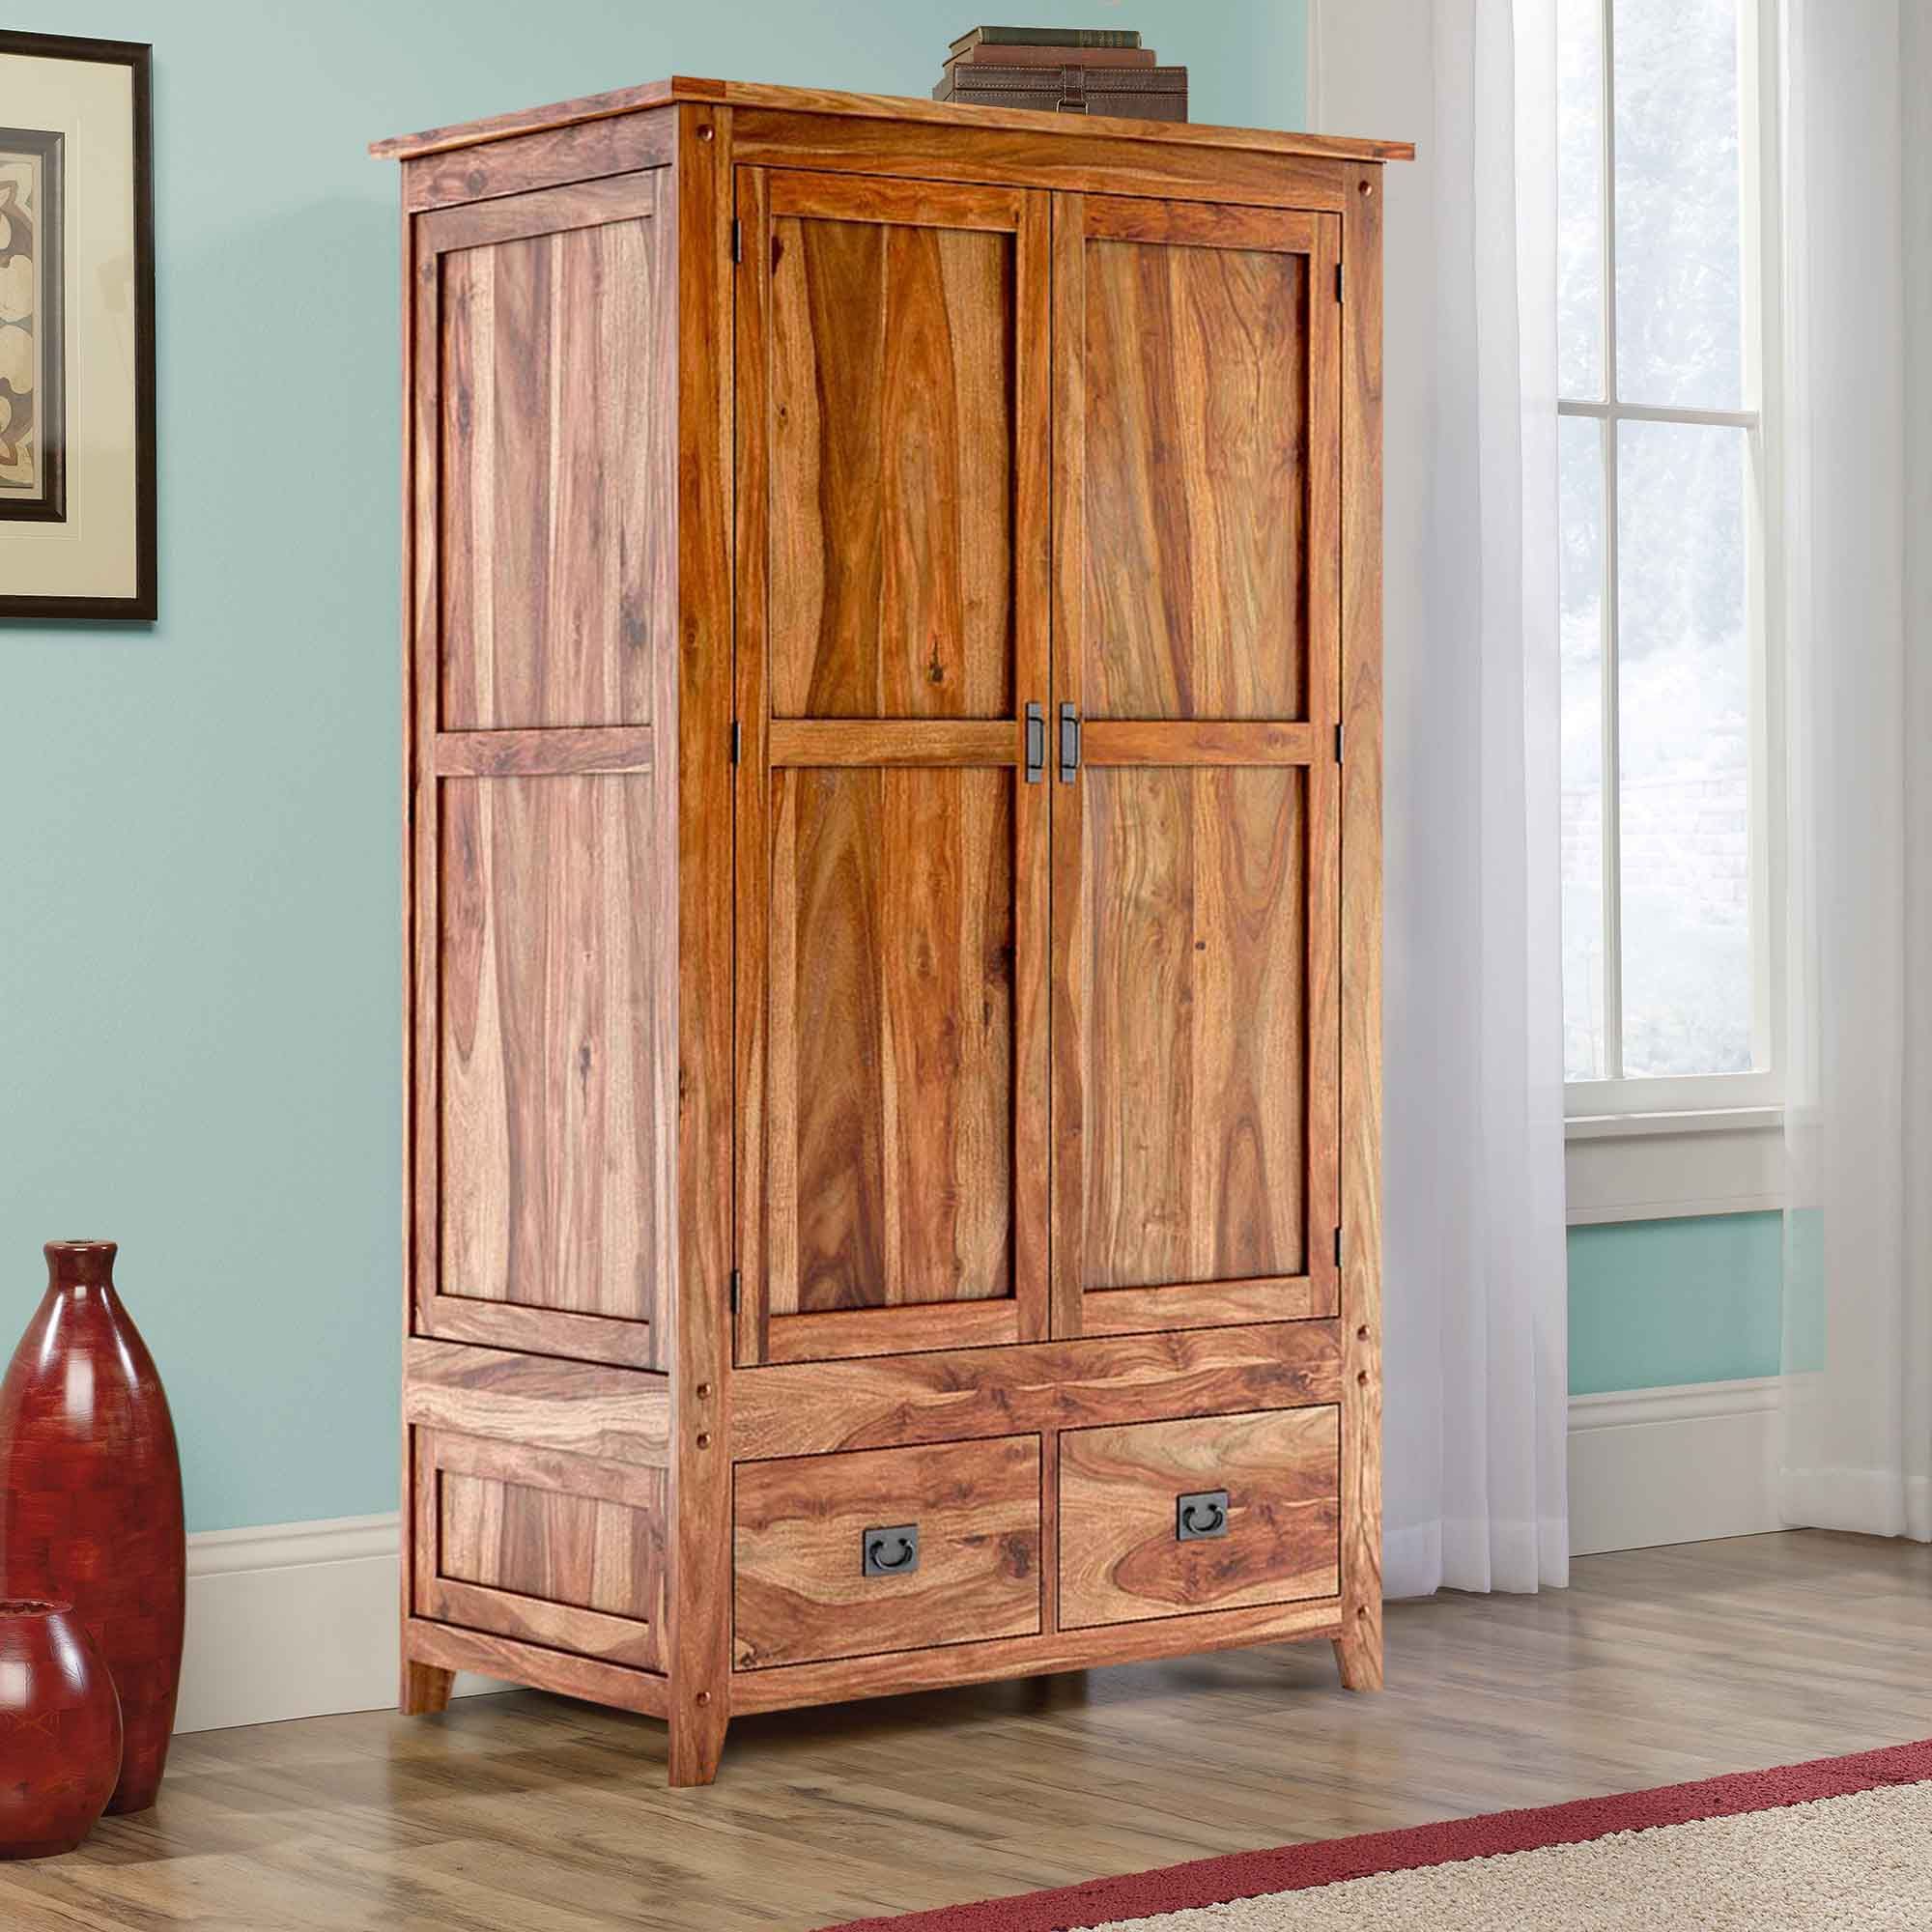 Delaware Farmhouse Solid Wood Wardrobe Armoire With Drawers Intended For Cheap Solid Wood Wardrobes (Gallery 7 of 20)